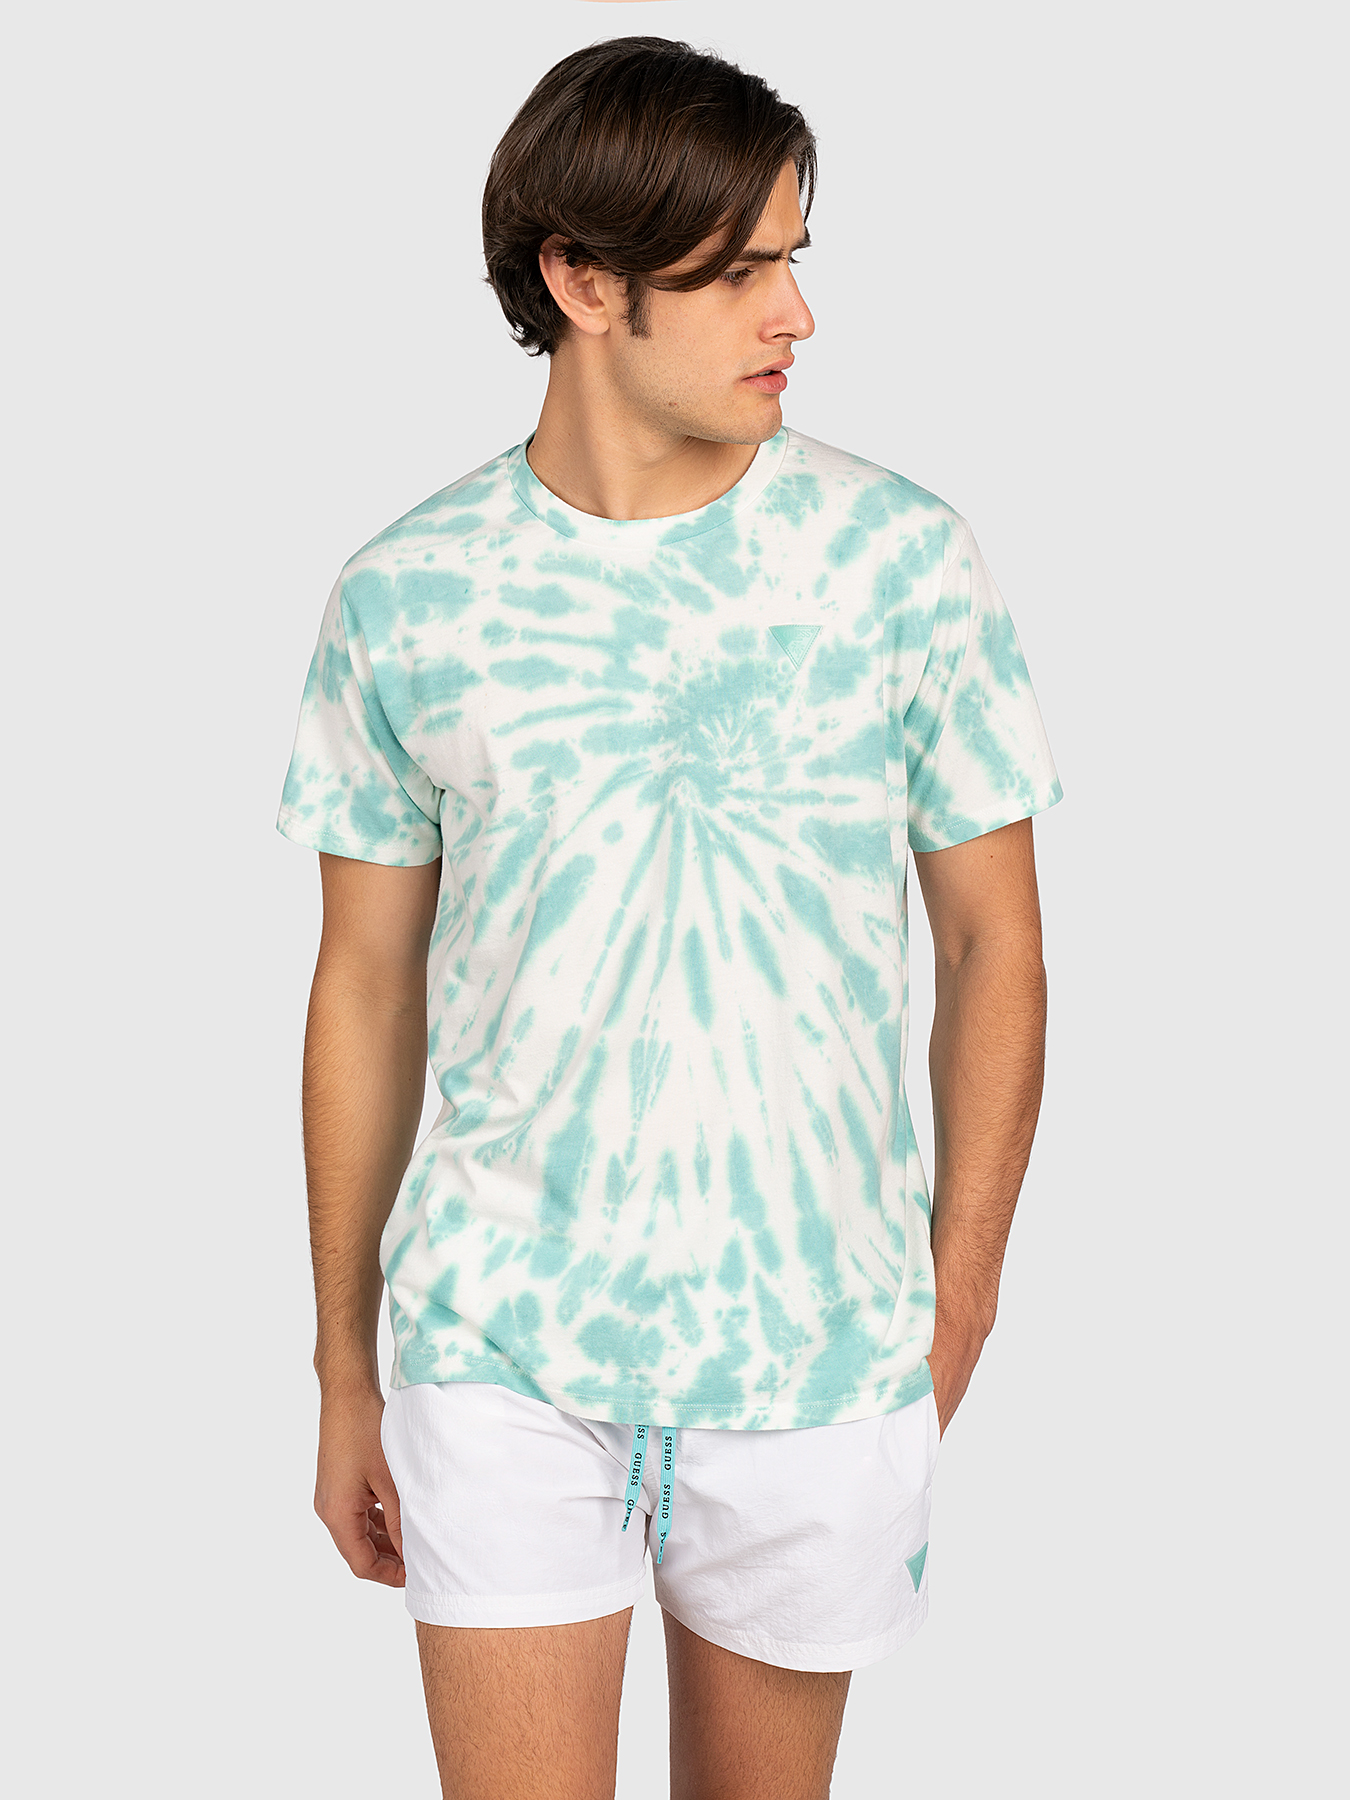 Cotton t-shirt with tie-dye effect brand